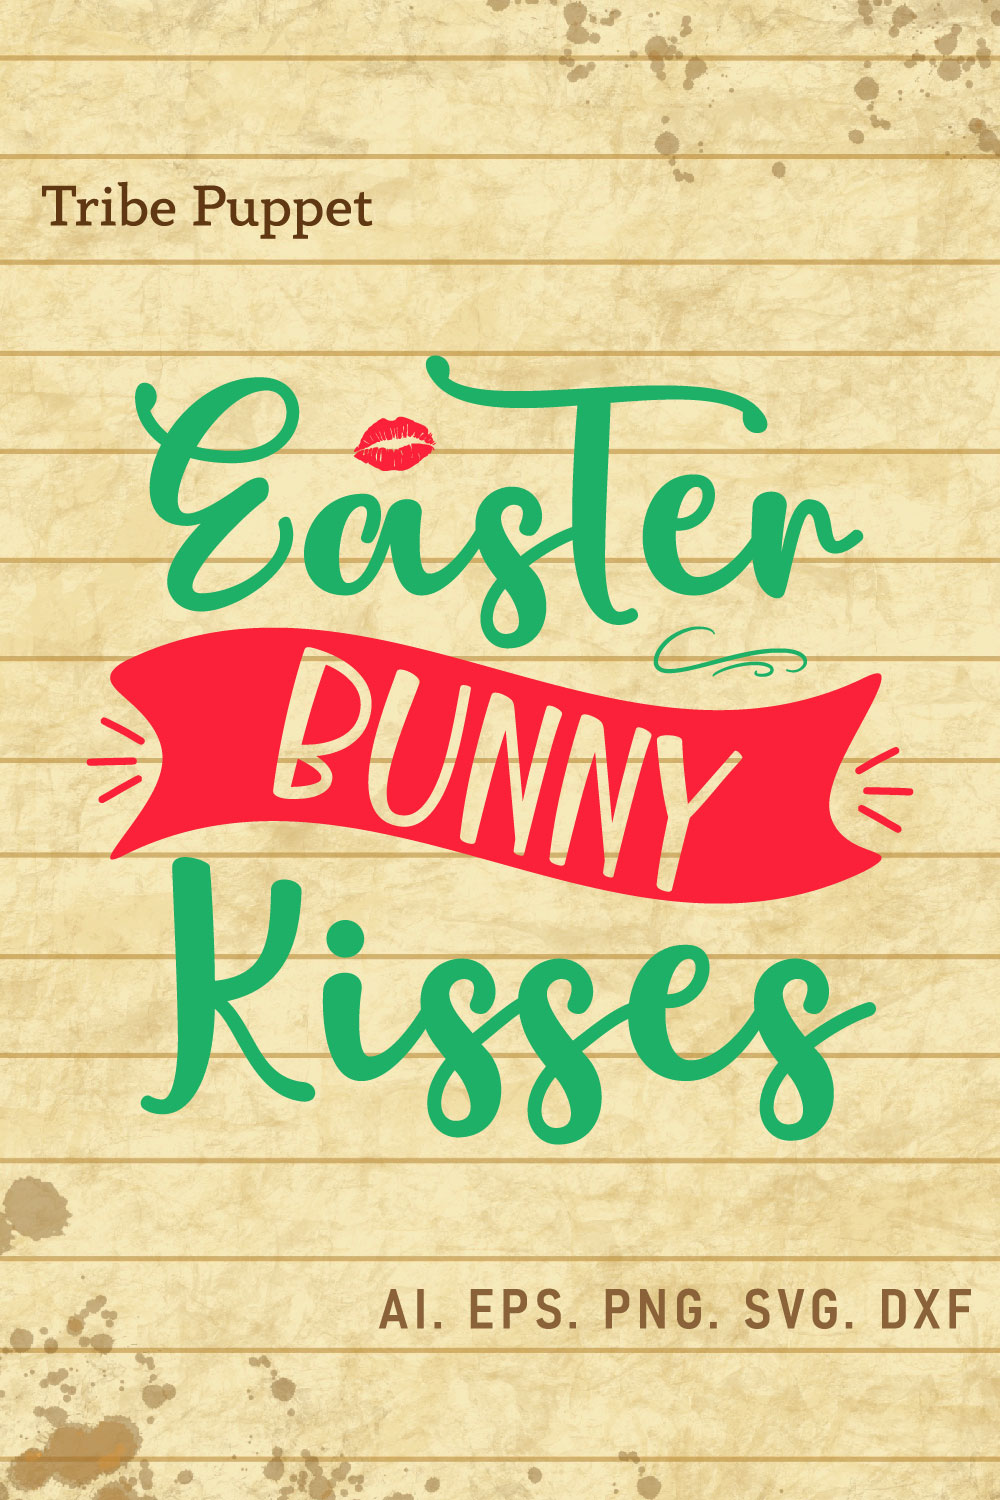 Easter day pinterest preview image.